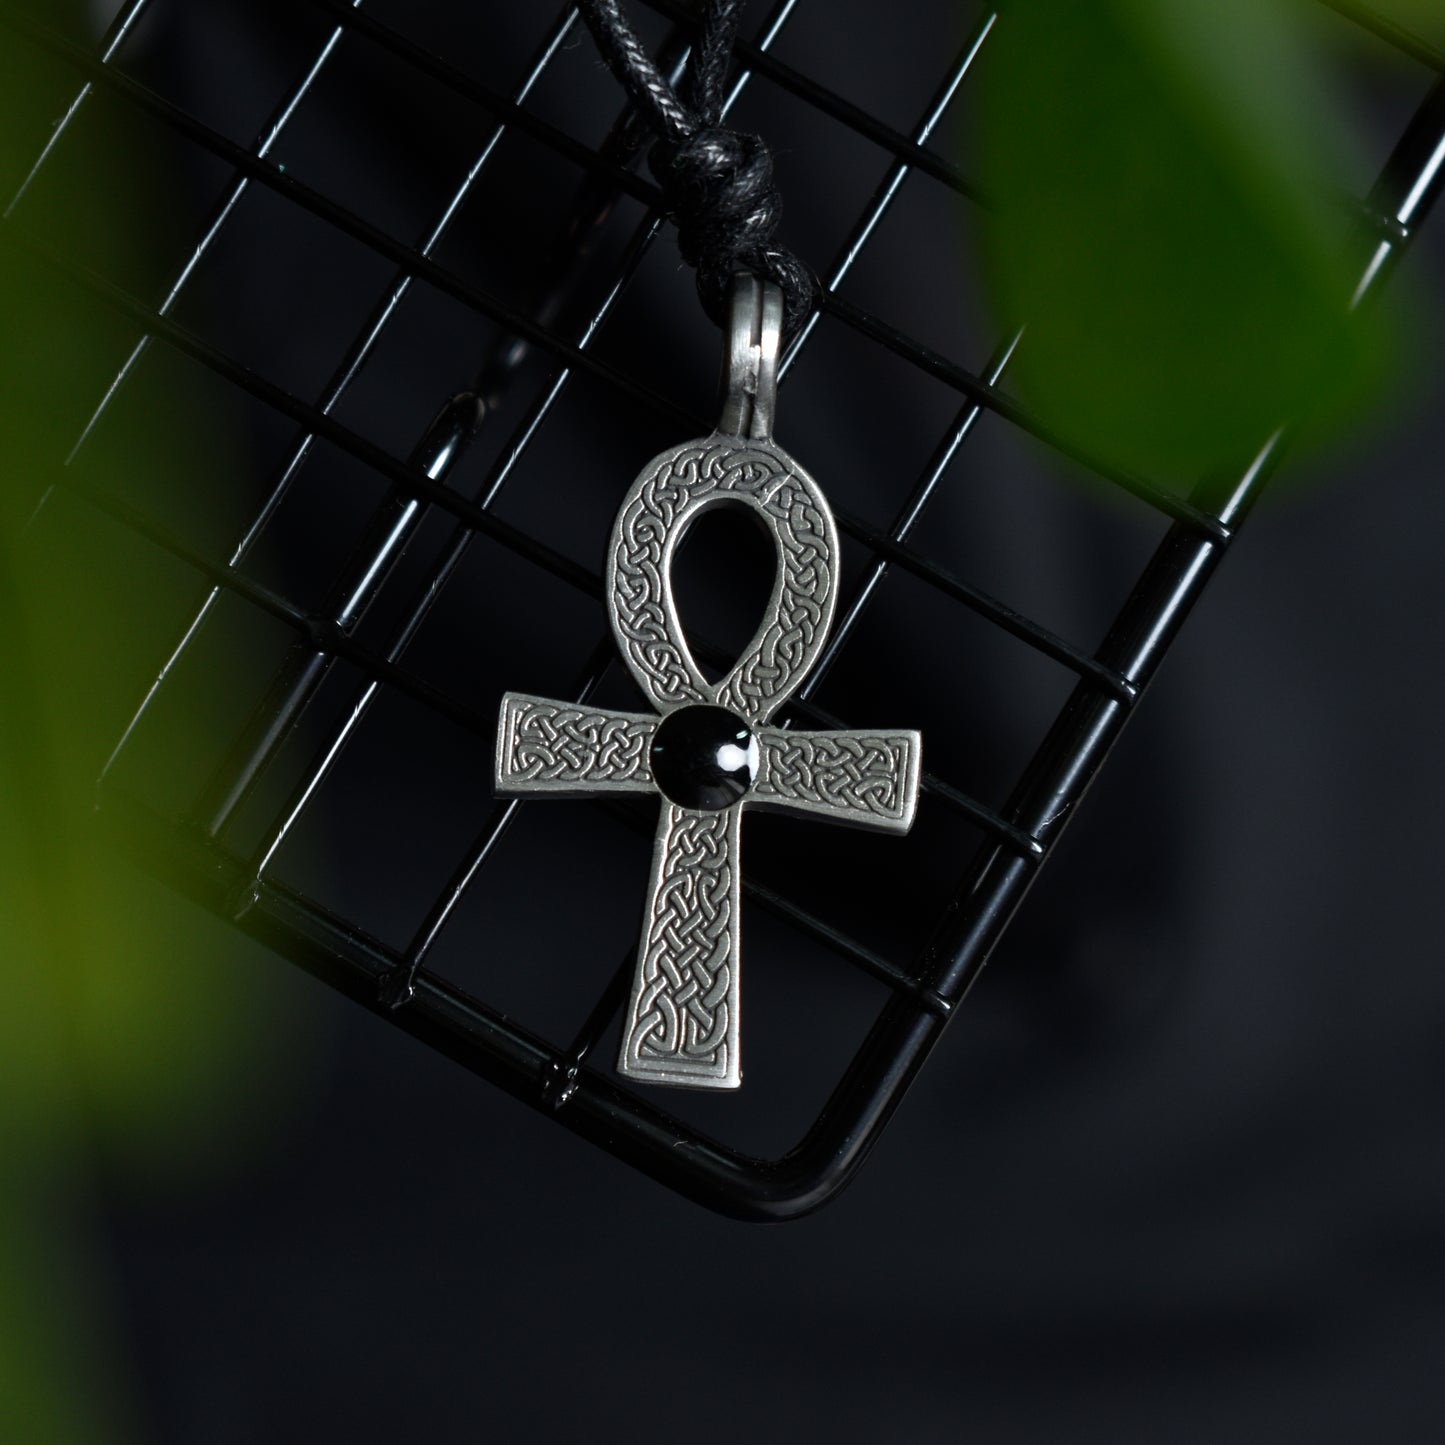 Egyptian Ankh Silver Pewter Charm Necklace Pendant Jewelry